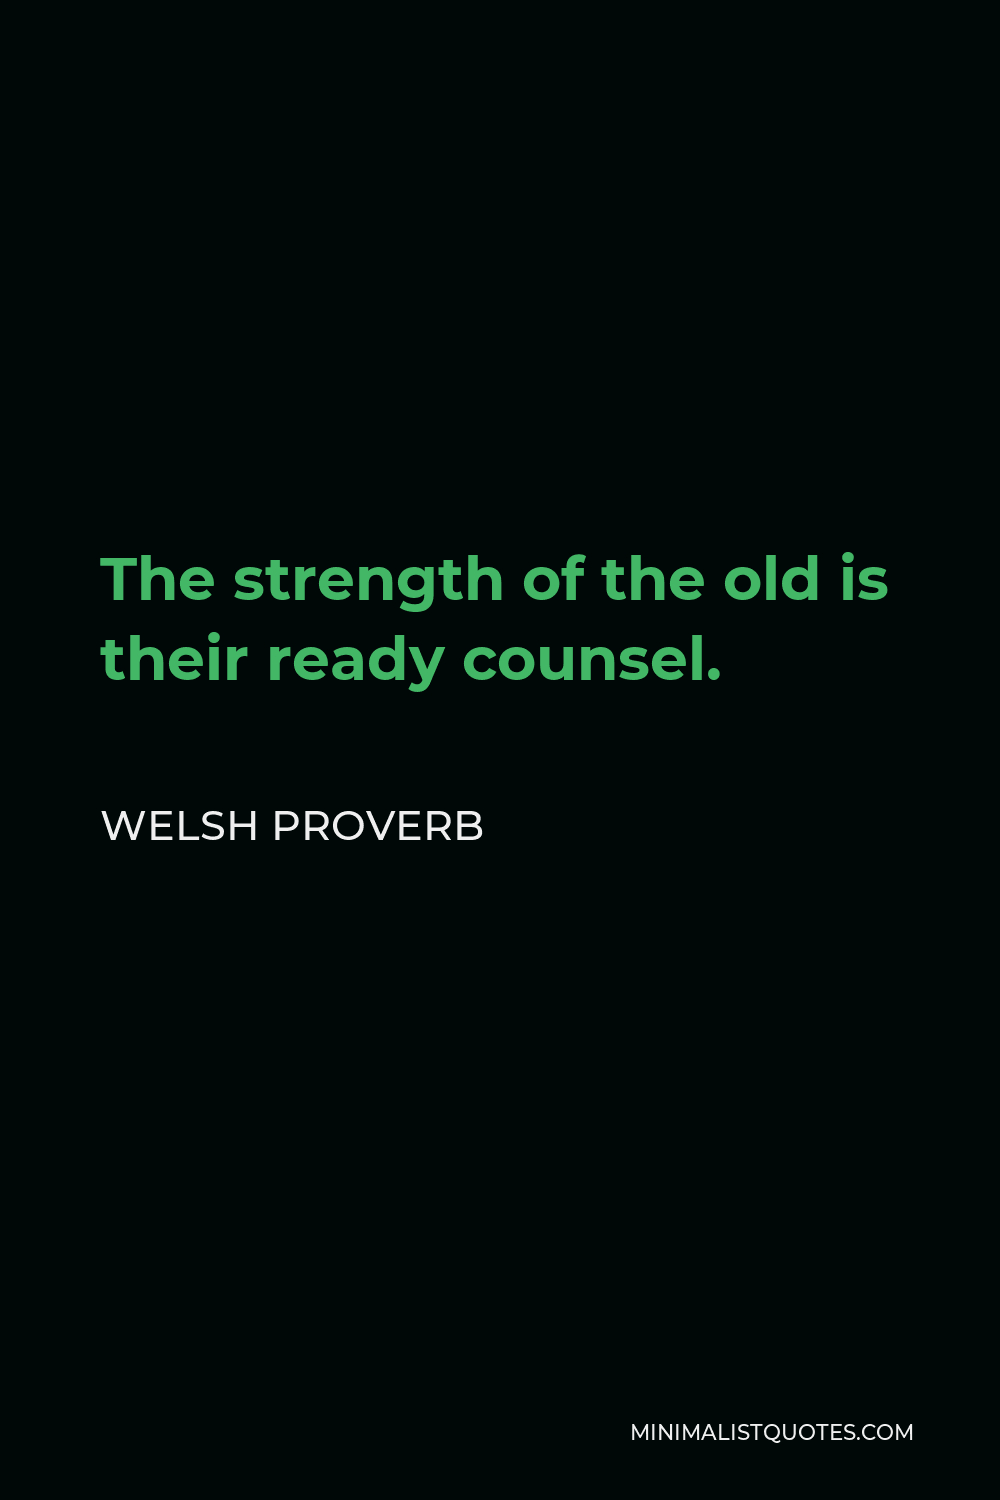 Welsh Proverb Quote - The strength of the old is their ready counsel.